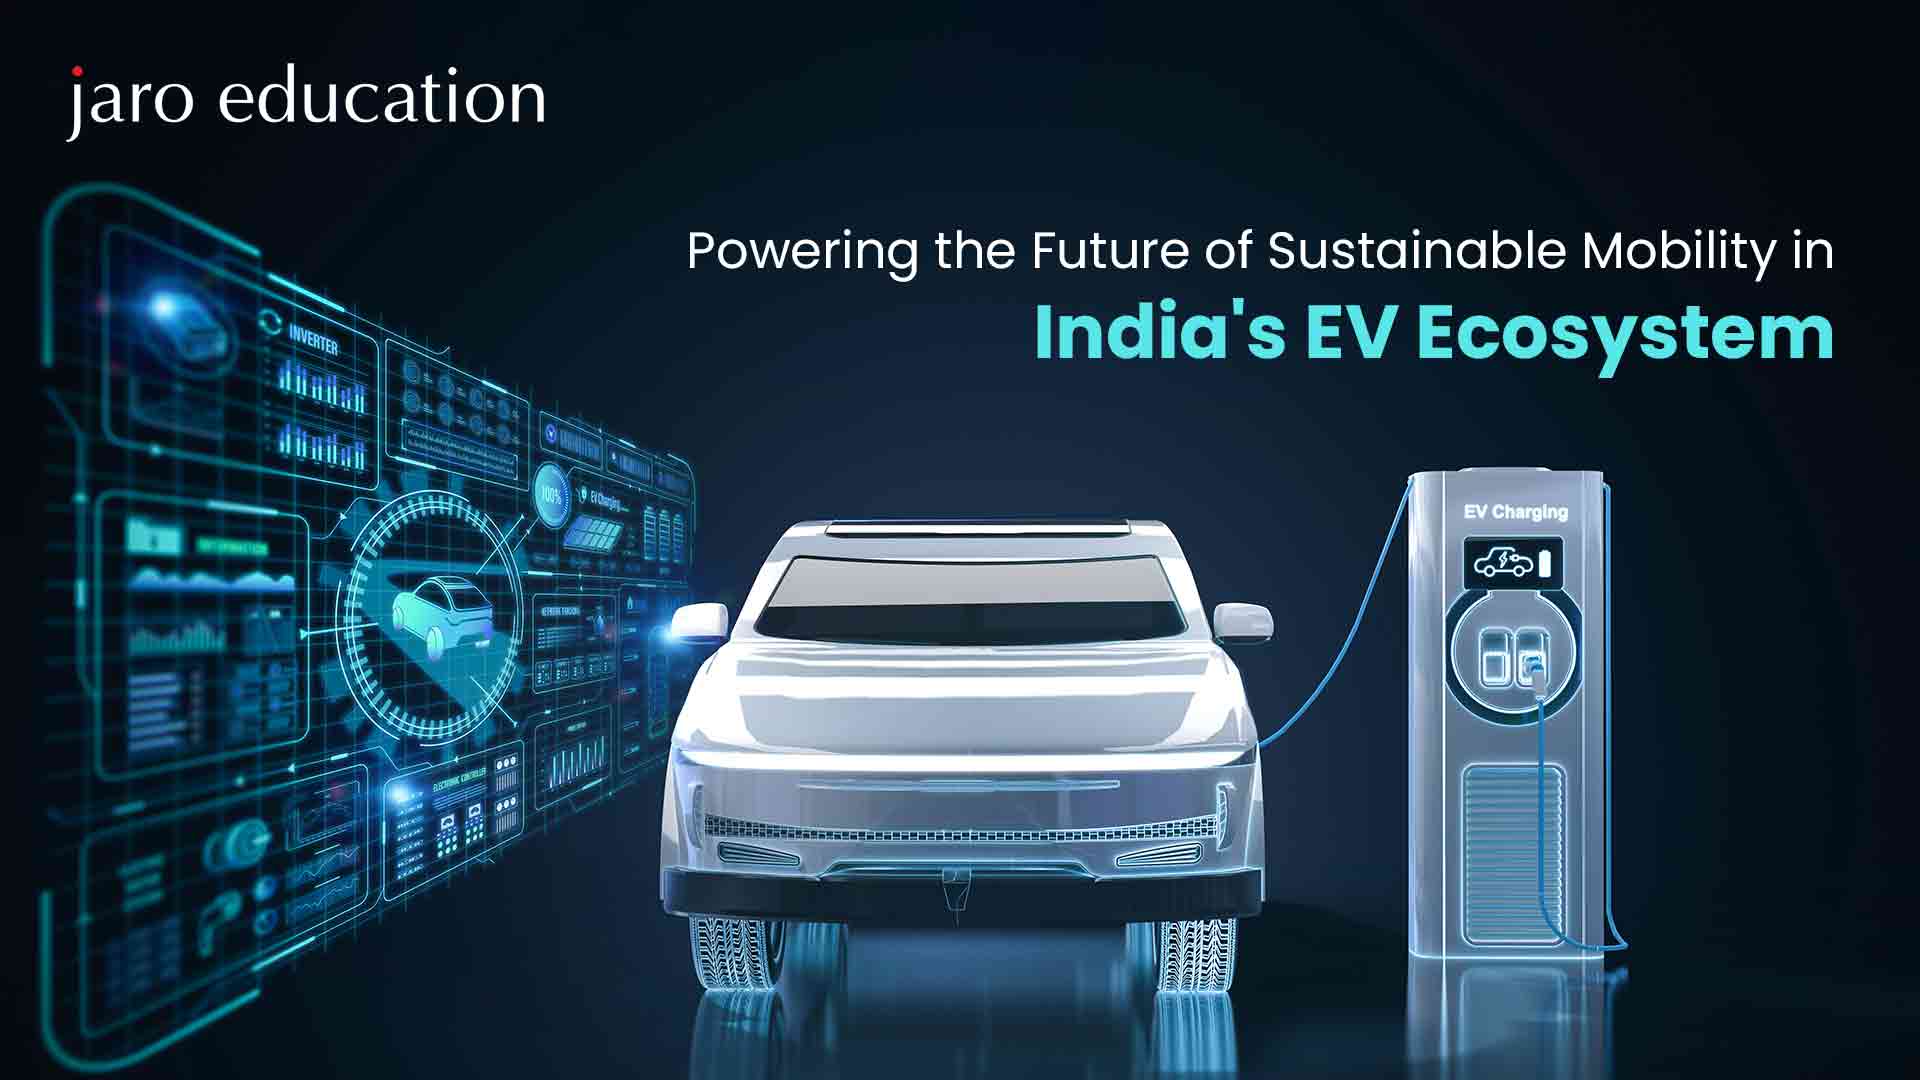 Powering the Future of Sustainable Mobility in India's EV Ecosystem